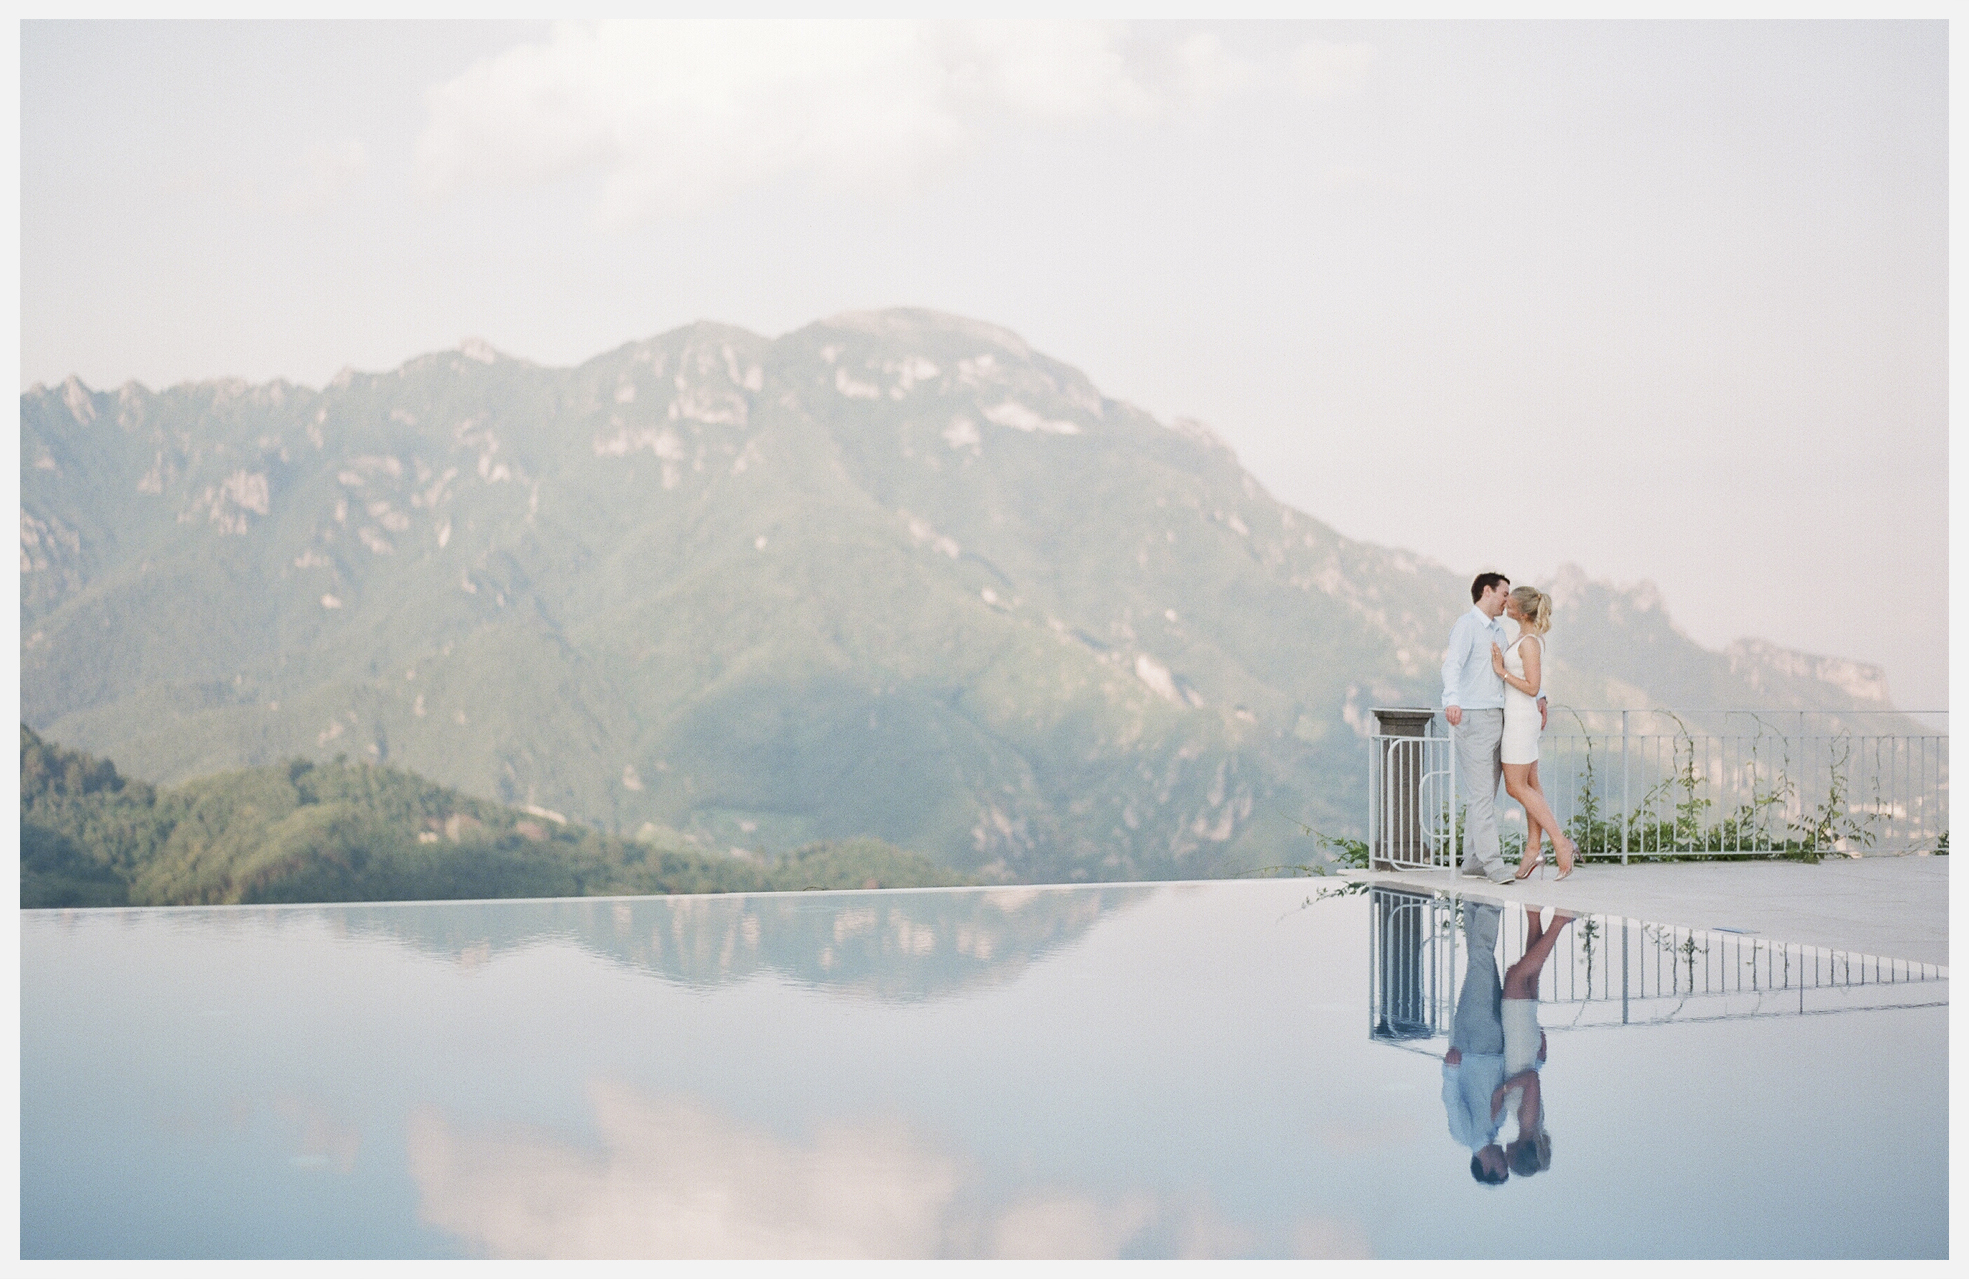 Amalfi Coast wedding photographer with engagement photos from Hotel Caruso in Ravello